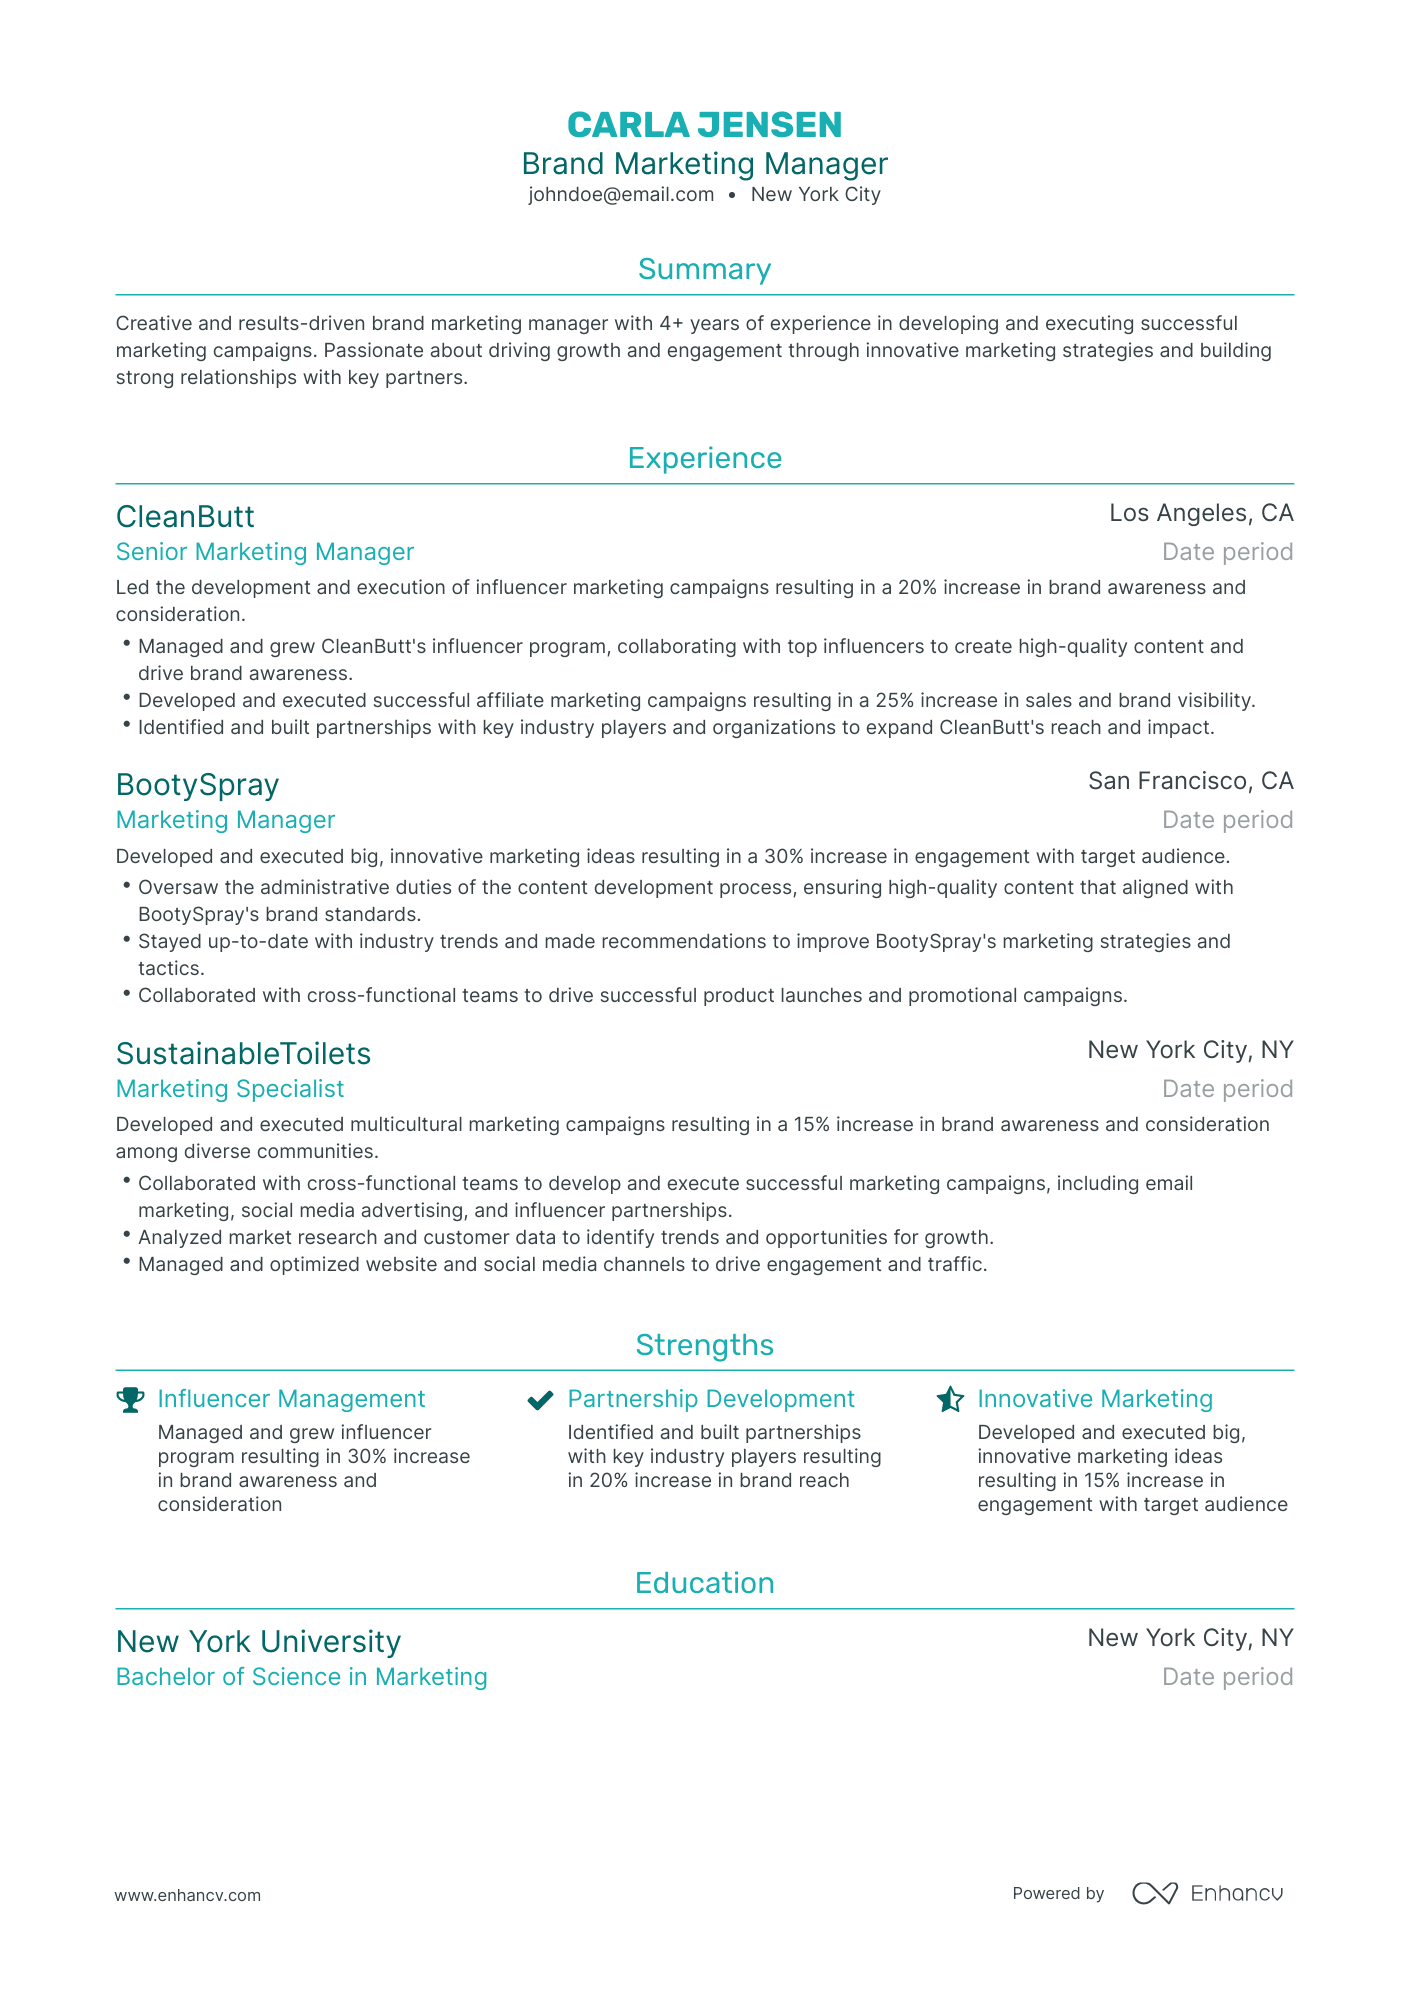 Traditional Brand Marketing Manager Resume Template